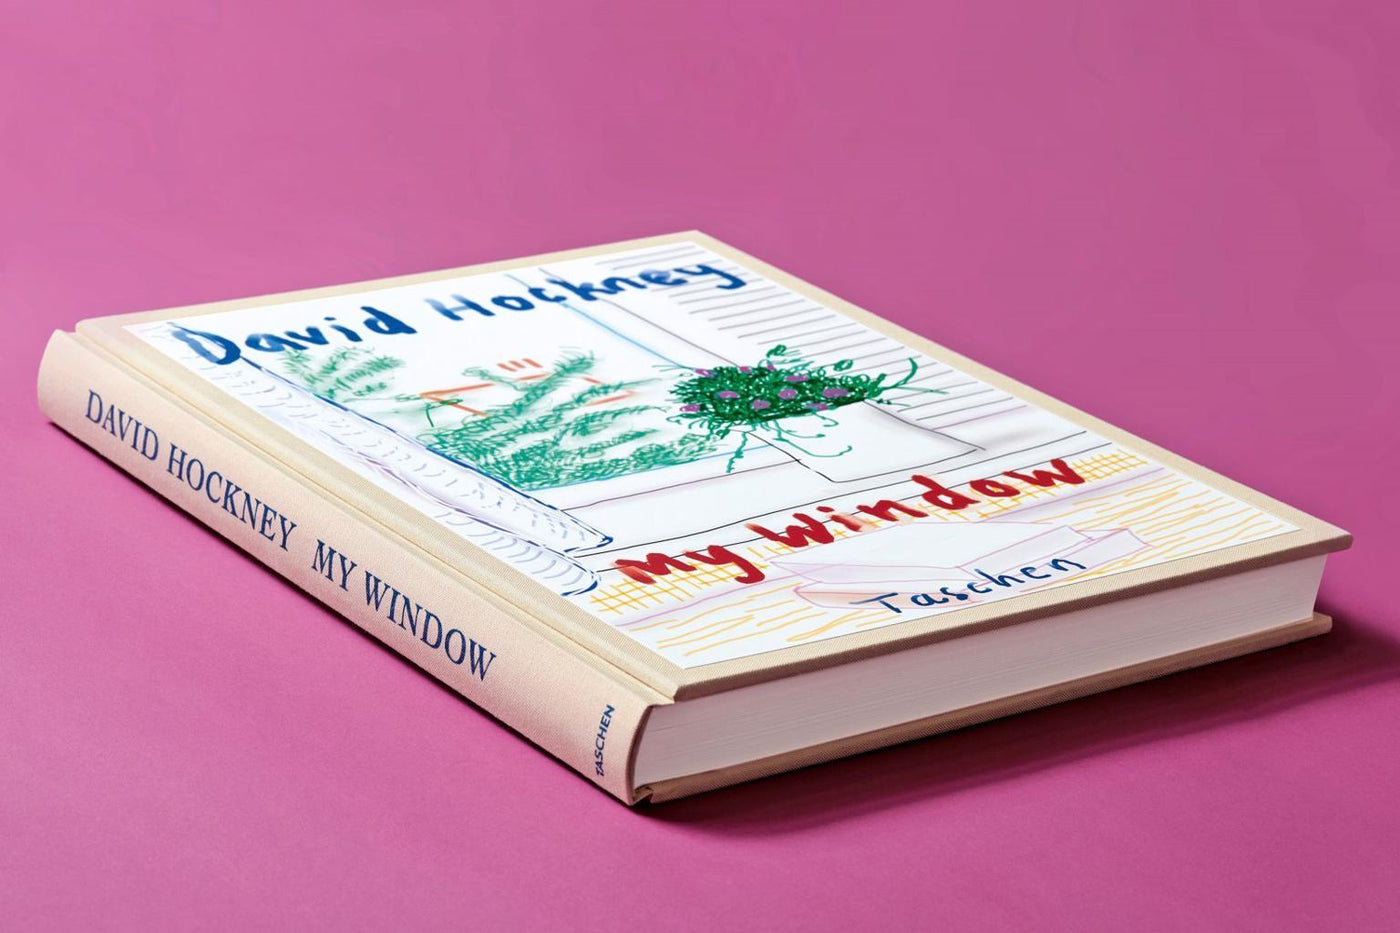 David Hockney | My Window Book | Limited Edition | Signed | Available for Sale | 2020 | Pink Background Product Shot